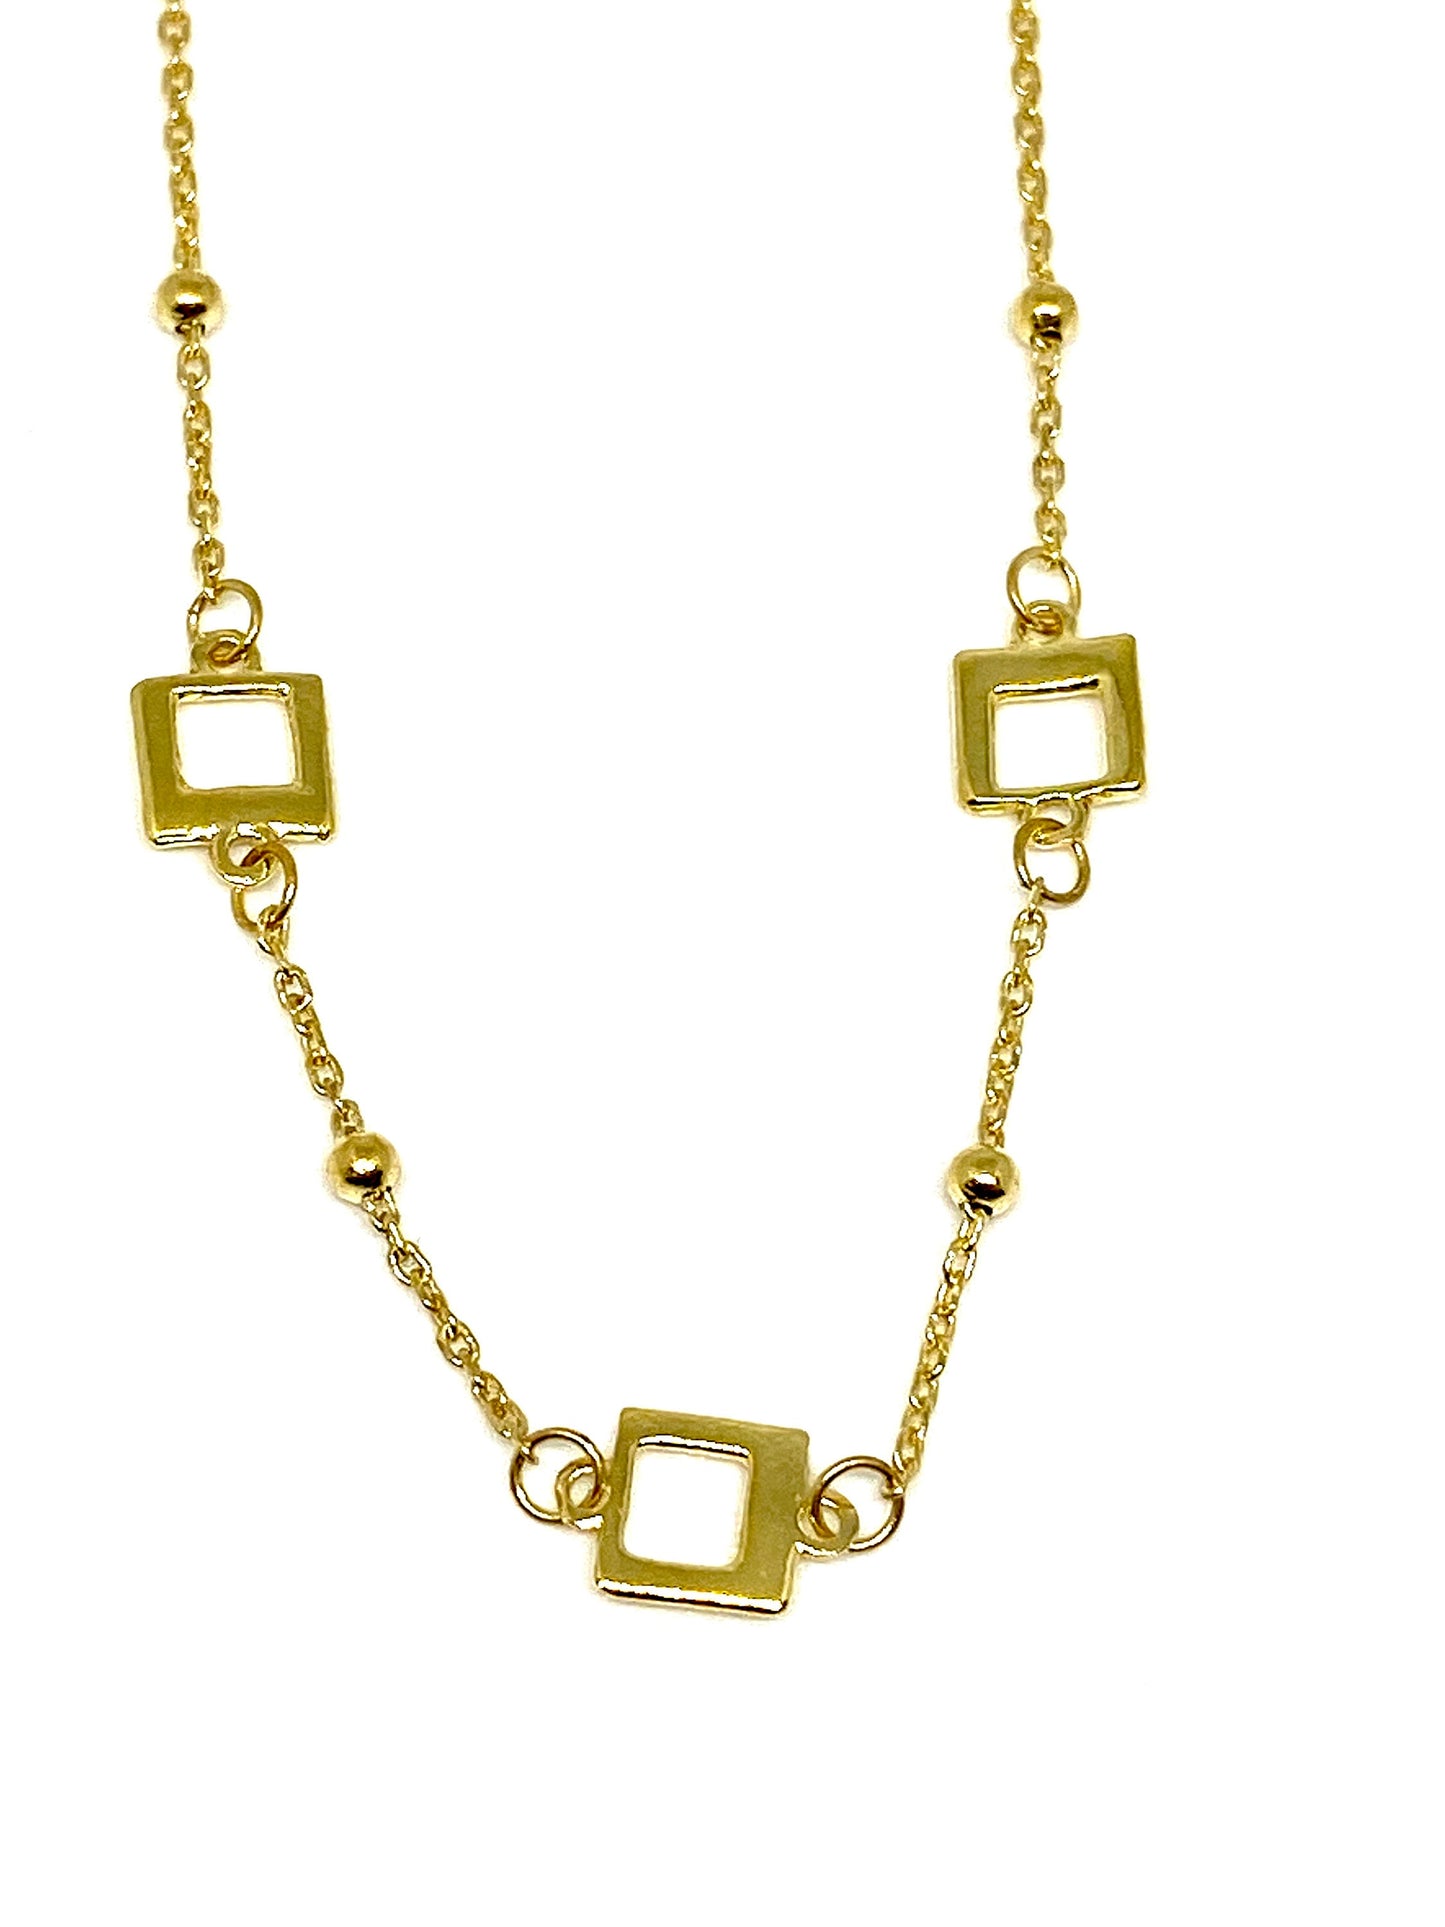 Yellow Gold Square Station Adjustable Chain Bracelet